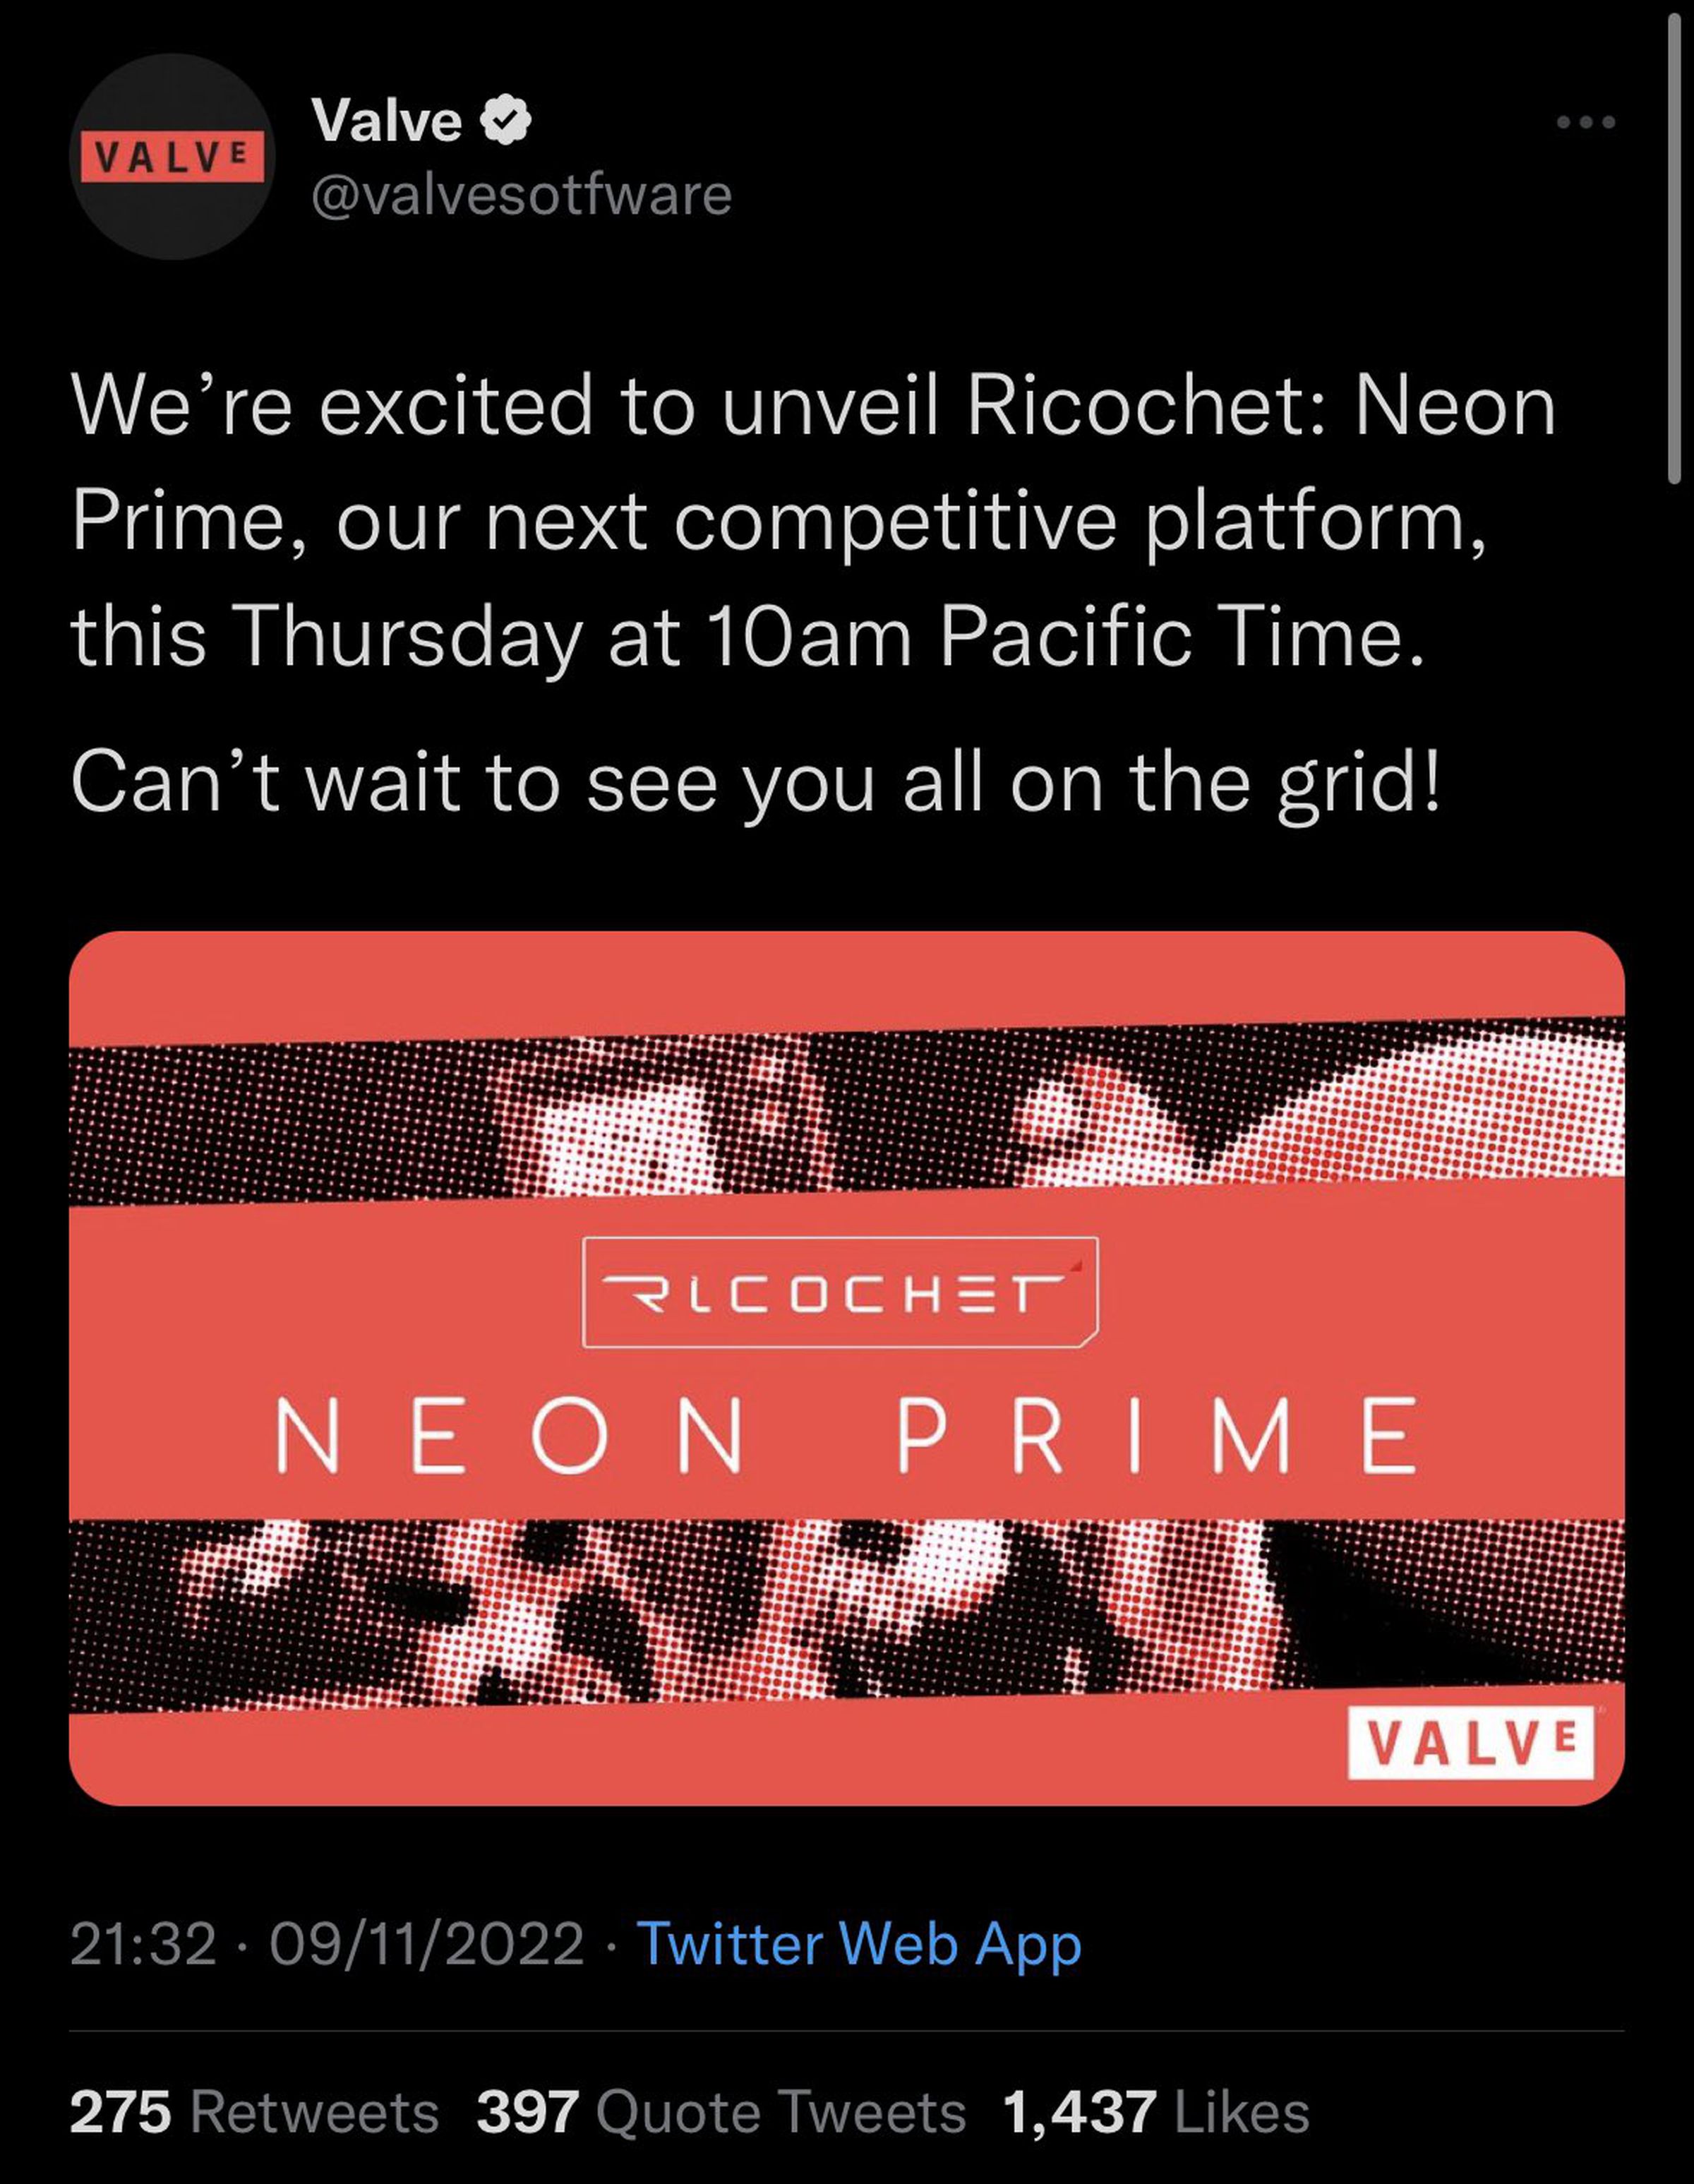 Neon Prime is a phrase Valve trademarked, but it's probably not for a return of its disc-throwing game Ricochet.